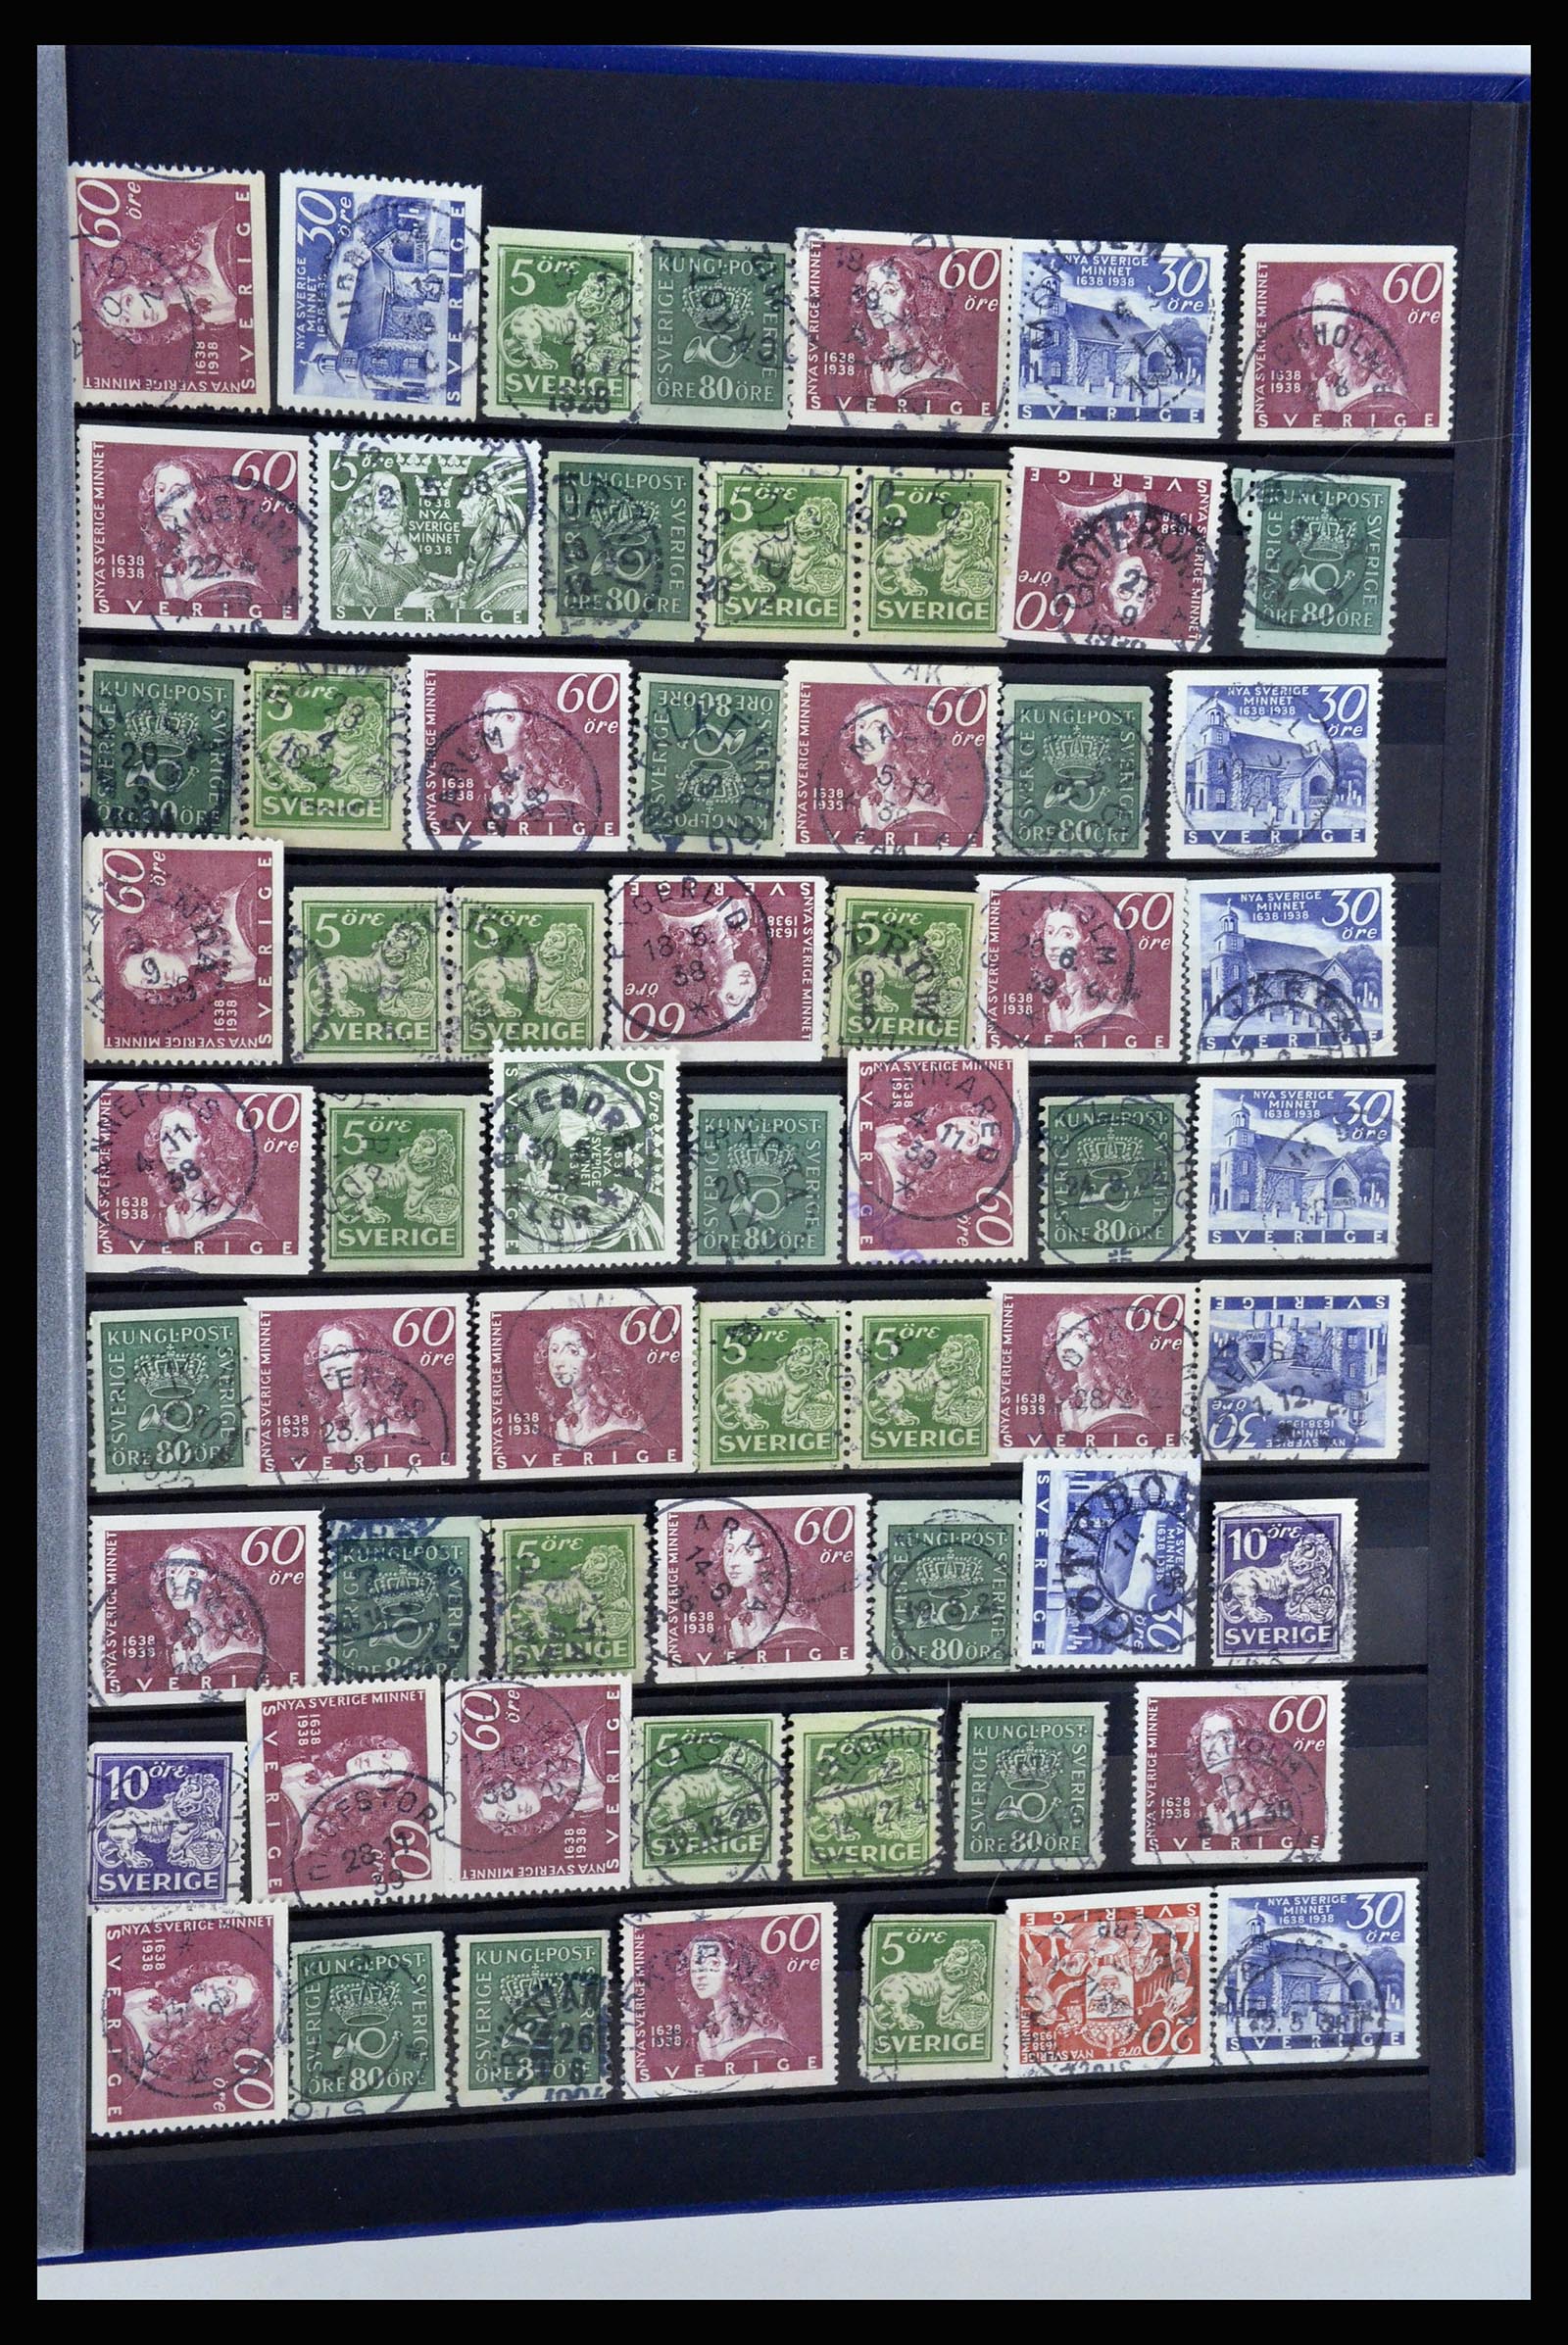 36316 057 - Stamp collection 36316 Sweden cancellations 1920-1938.